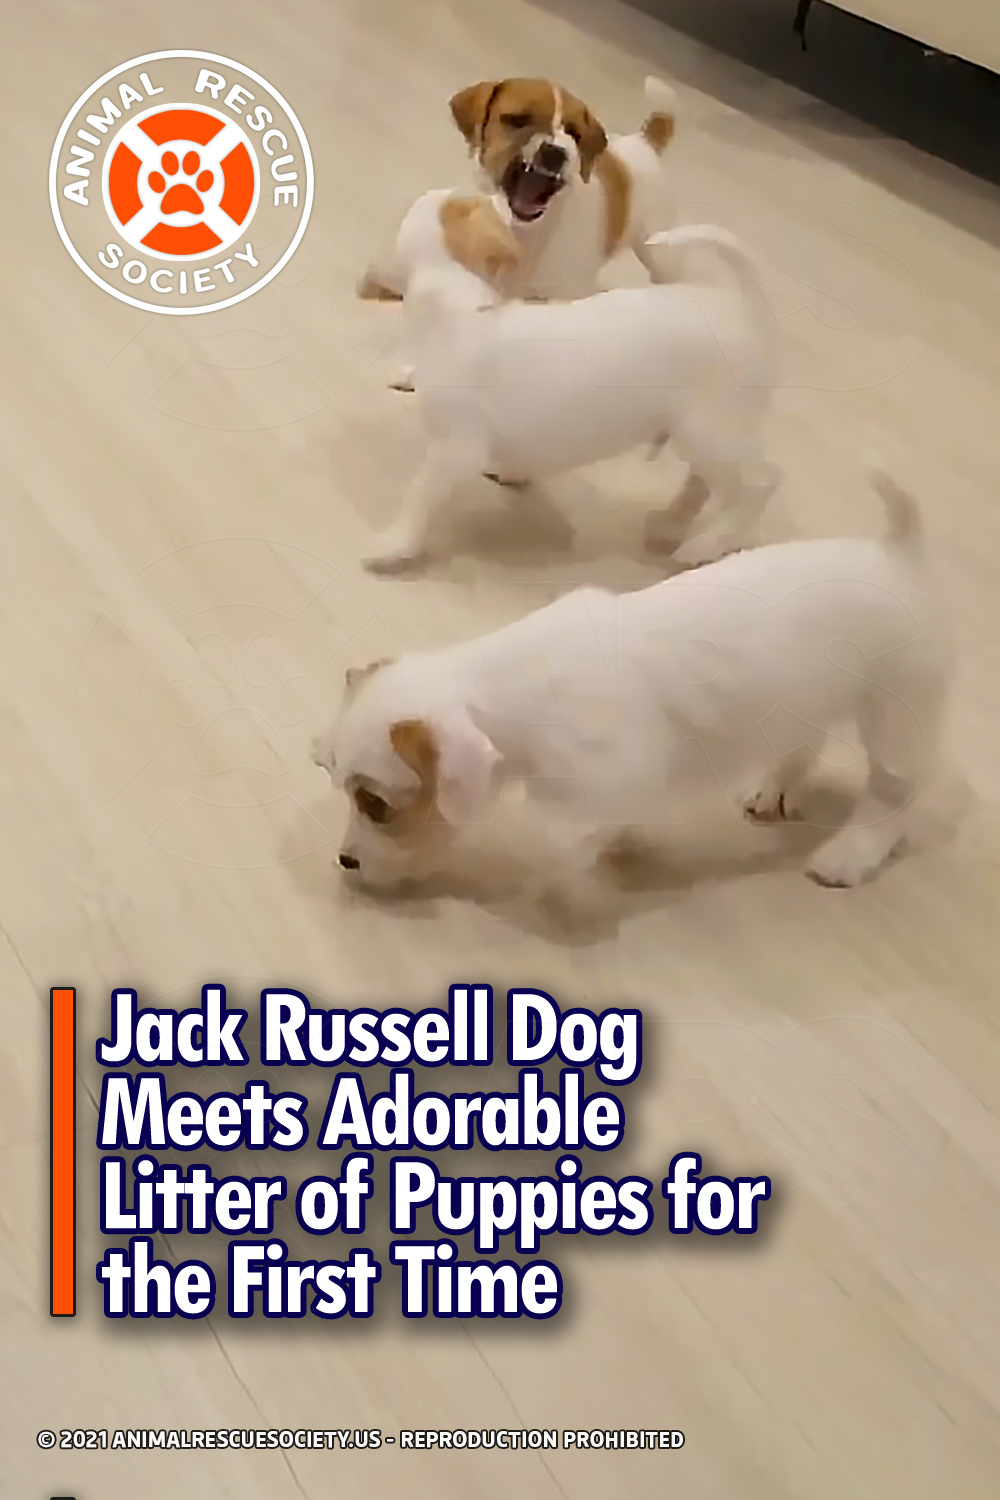 Jack Russell Dog Meets Adorable Litter of Puppies for the First Time